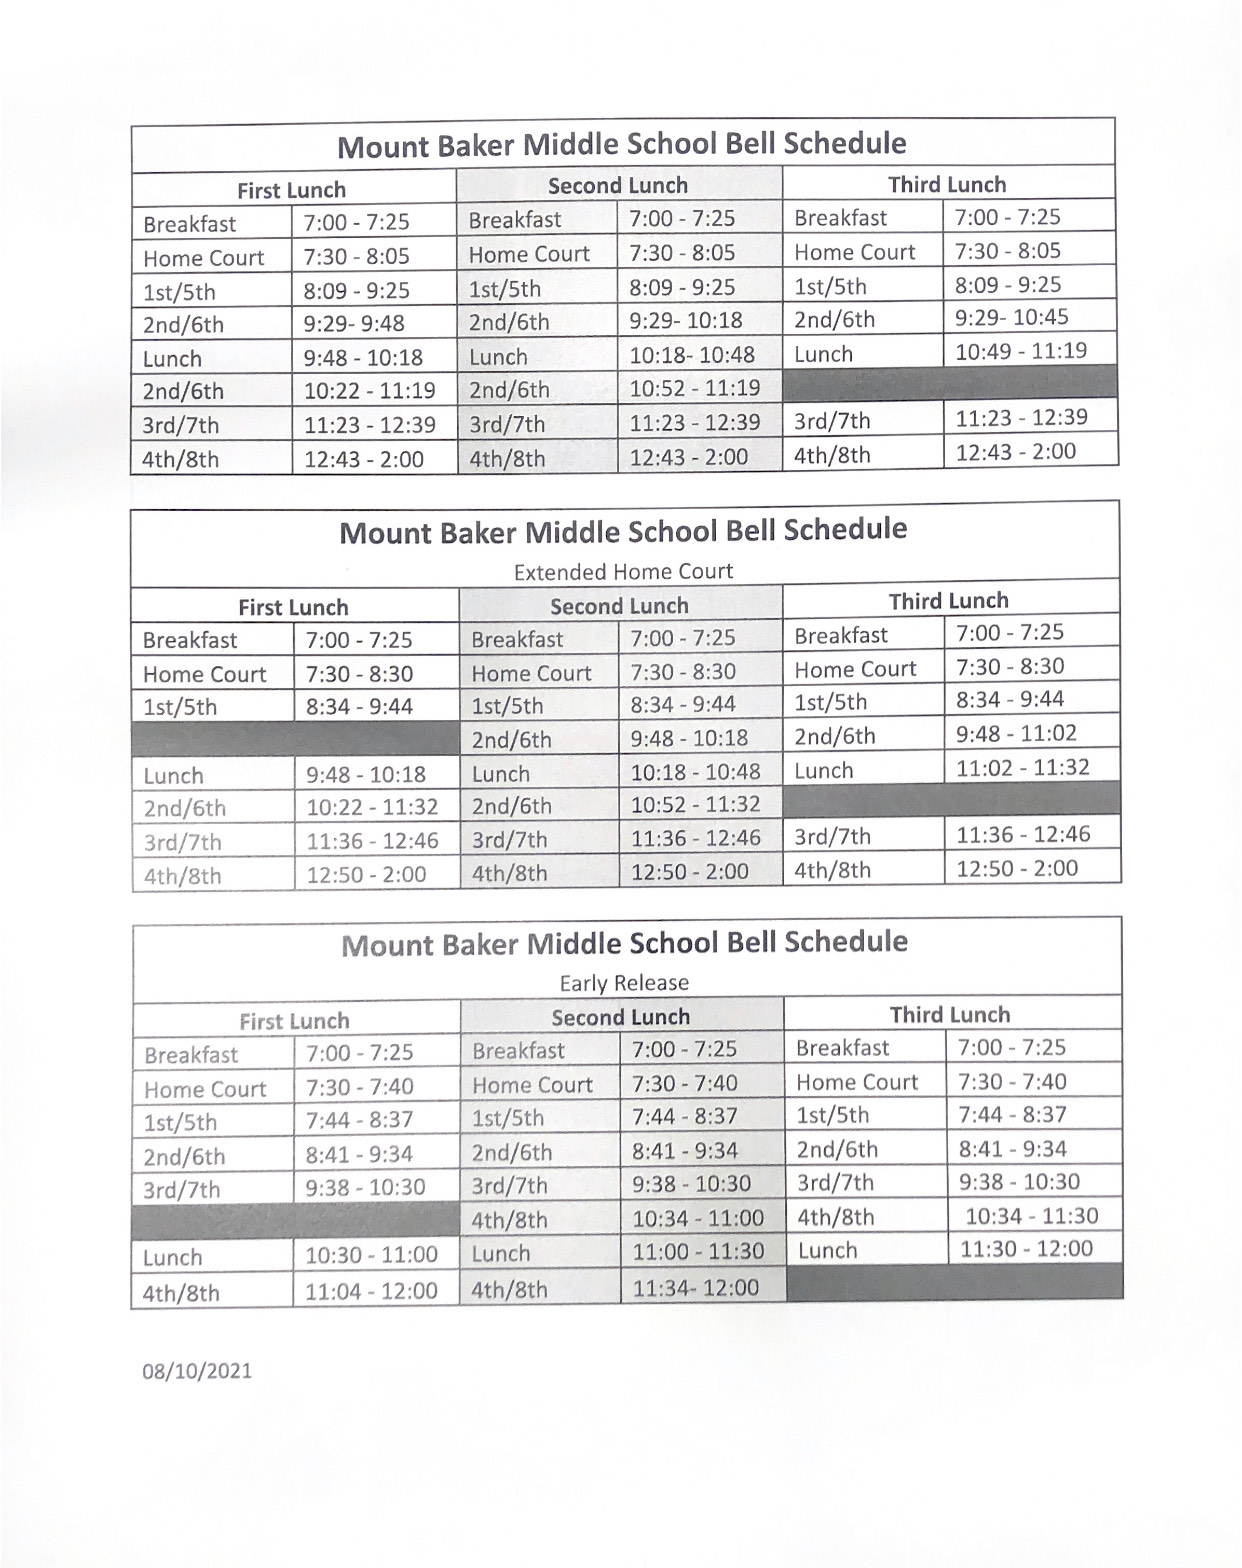 Middle School Bell Schedule 2021/2022 | Mount Baker Middle